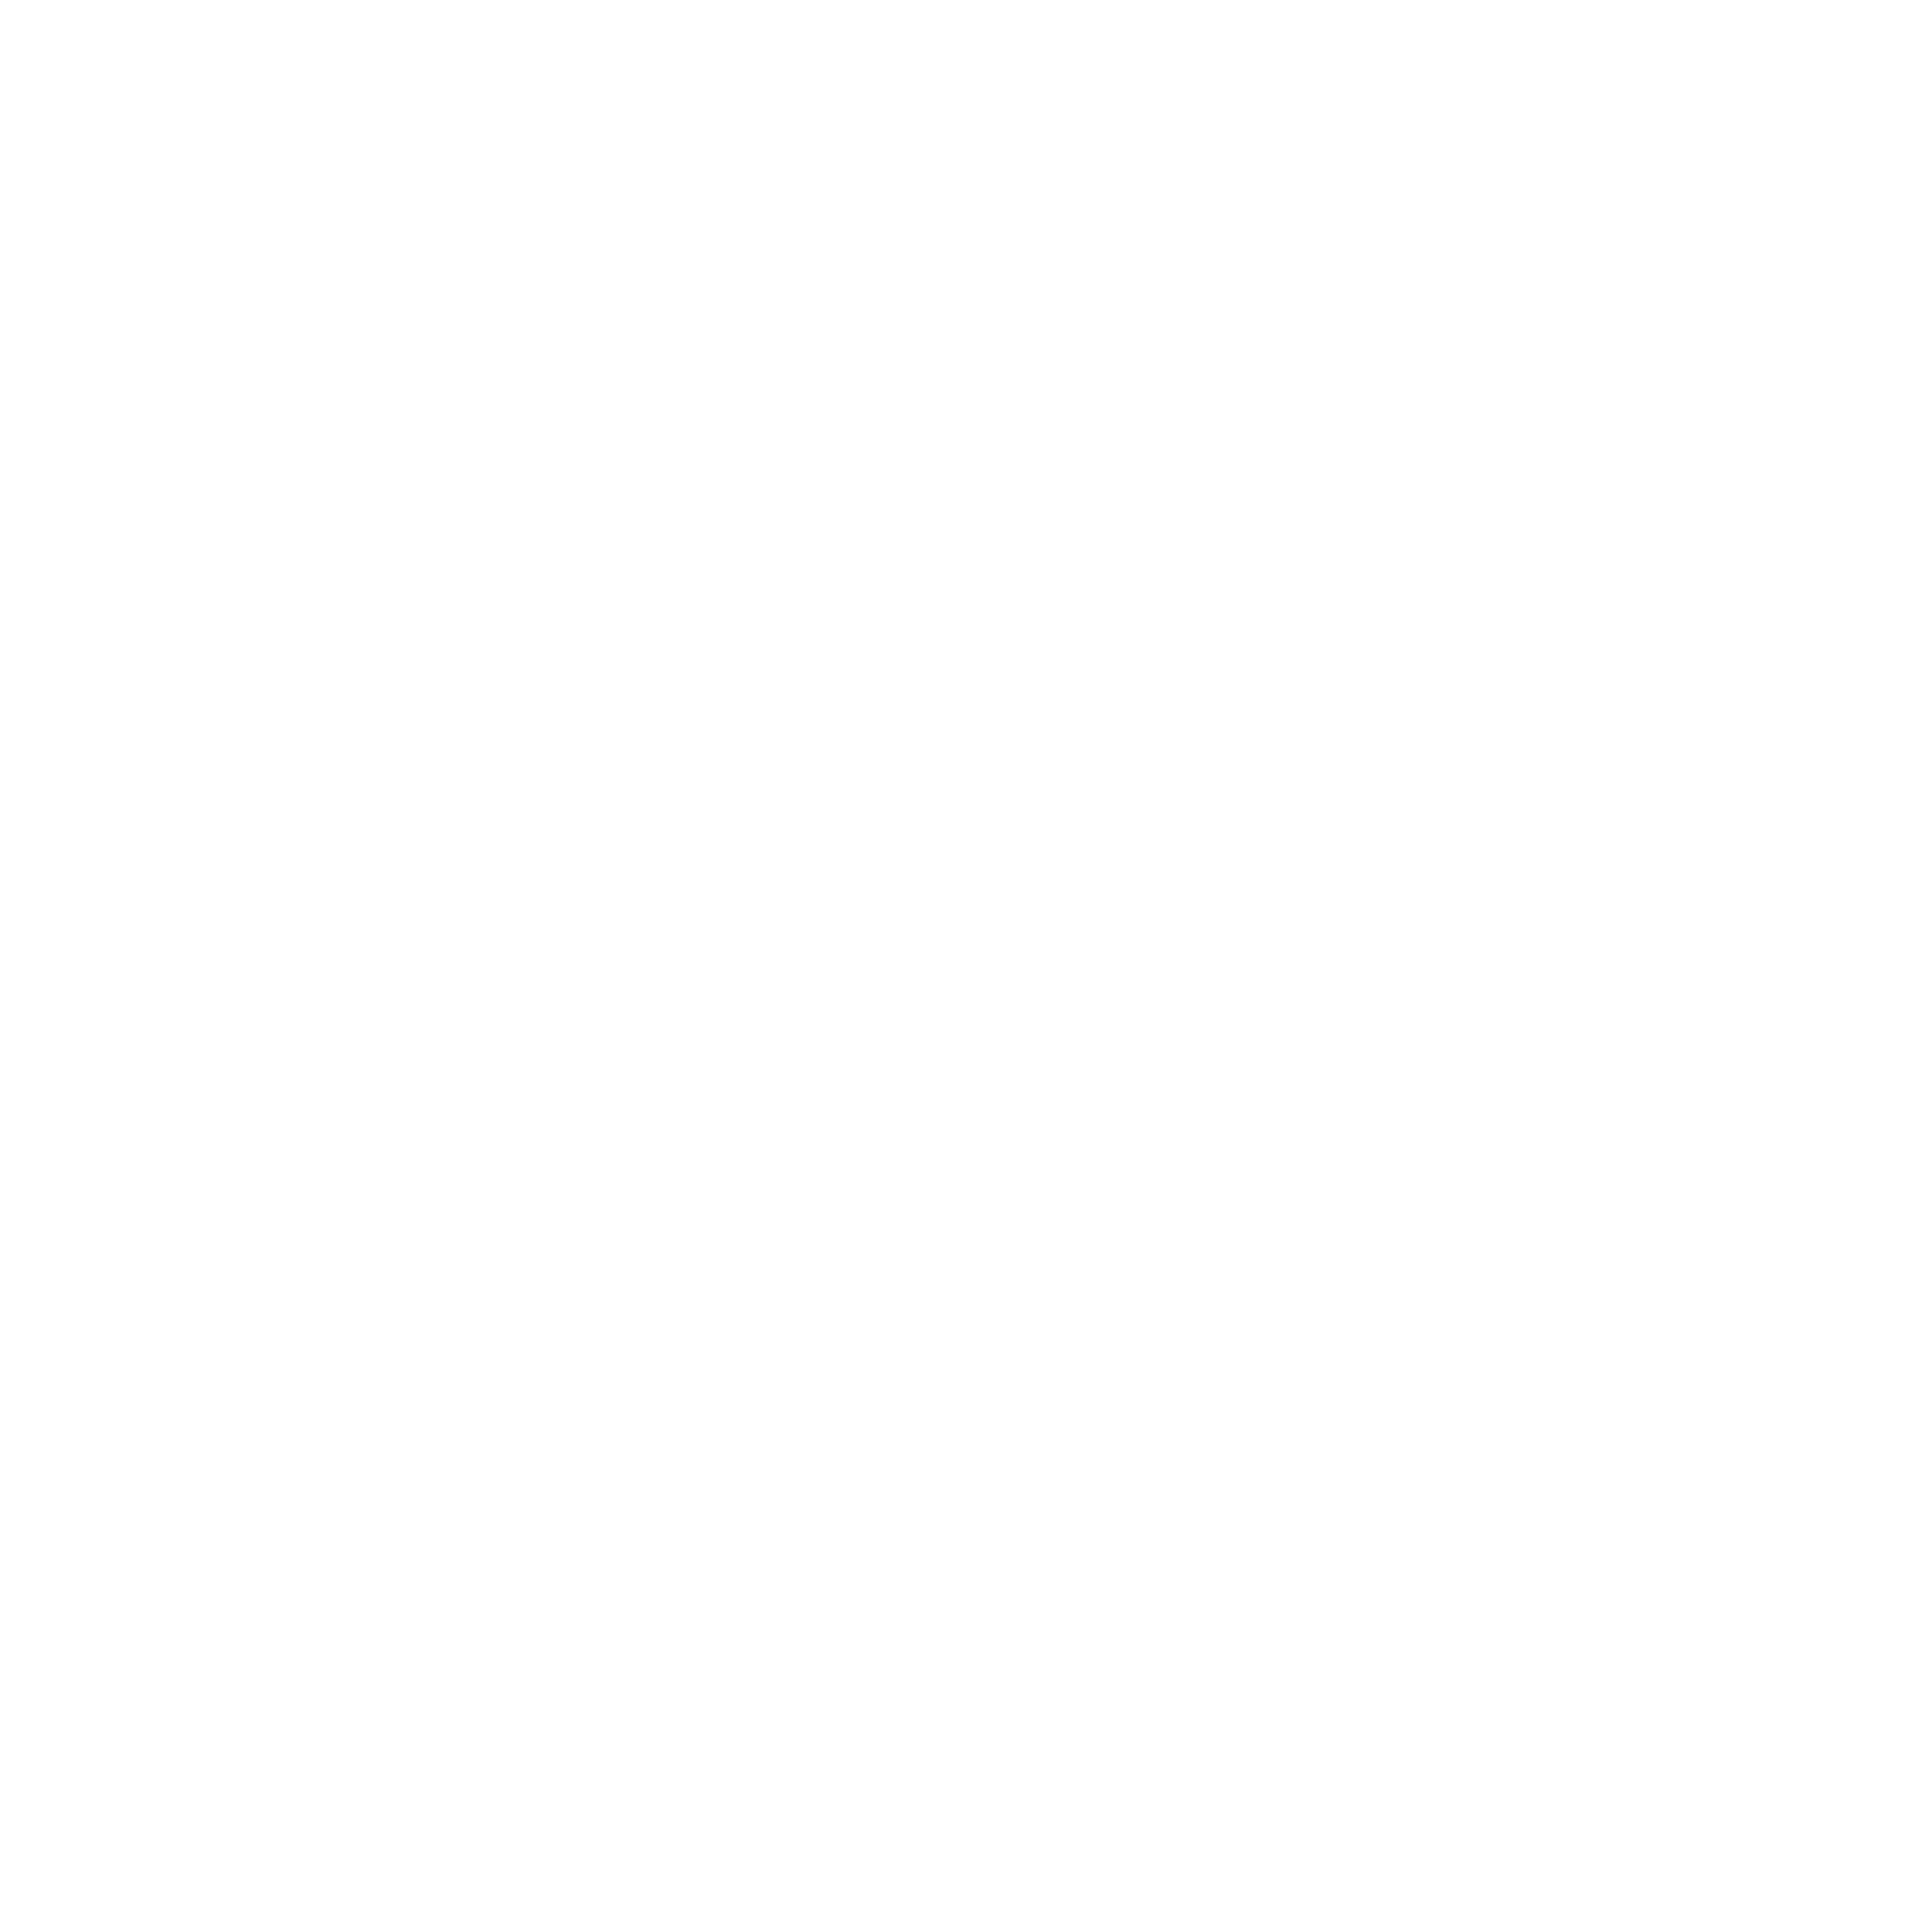 thermosolutions